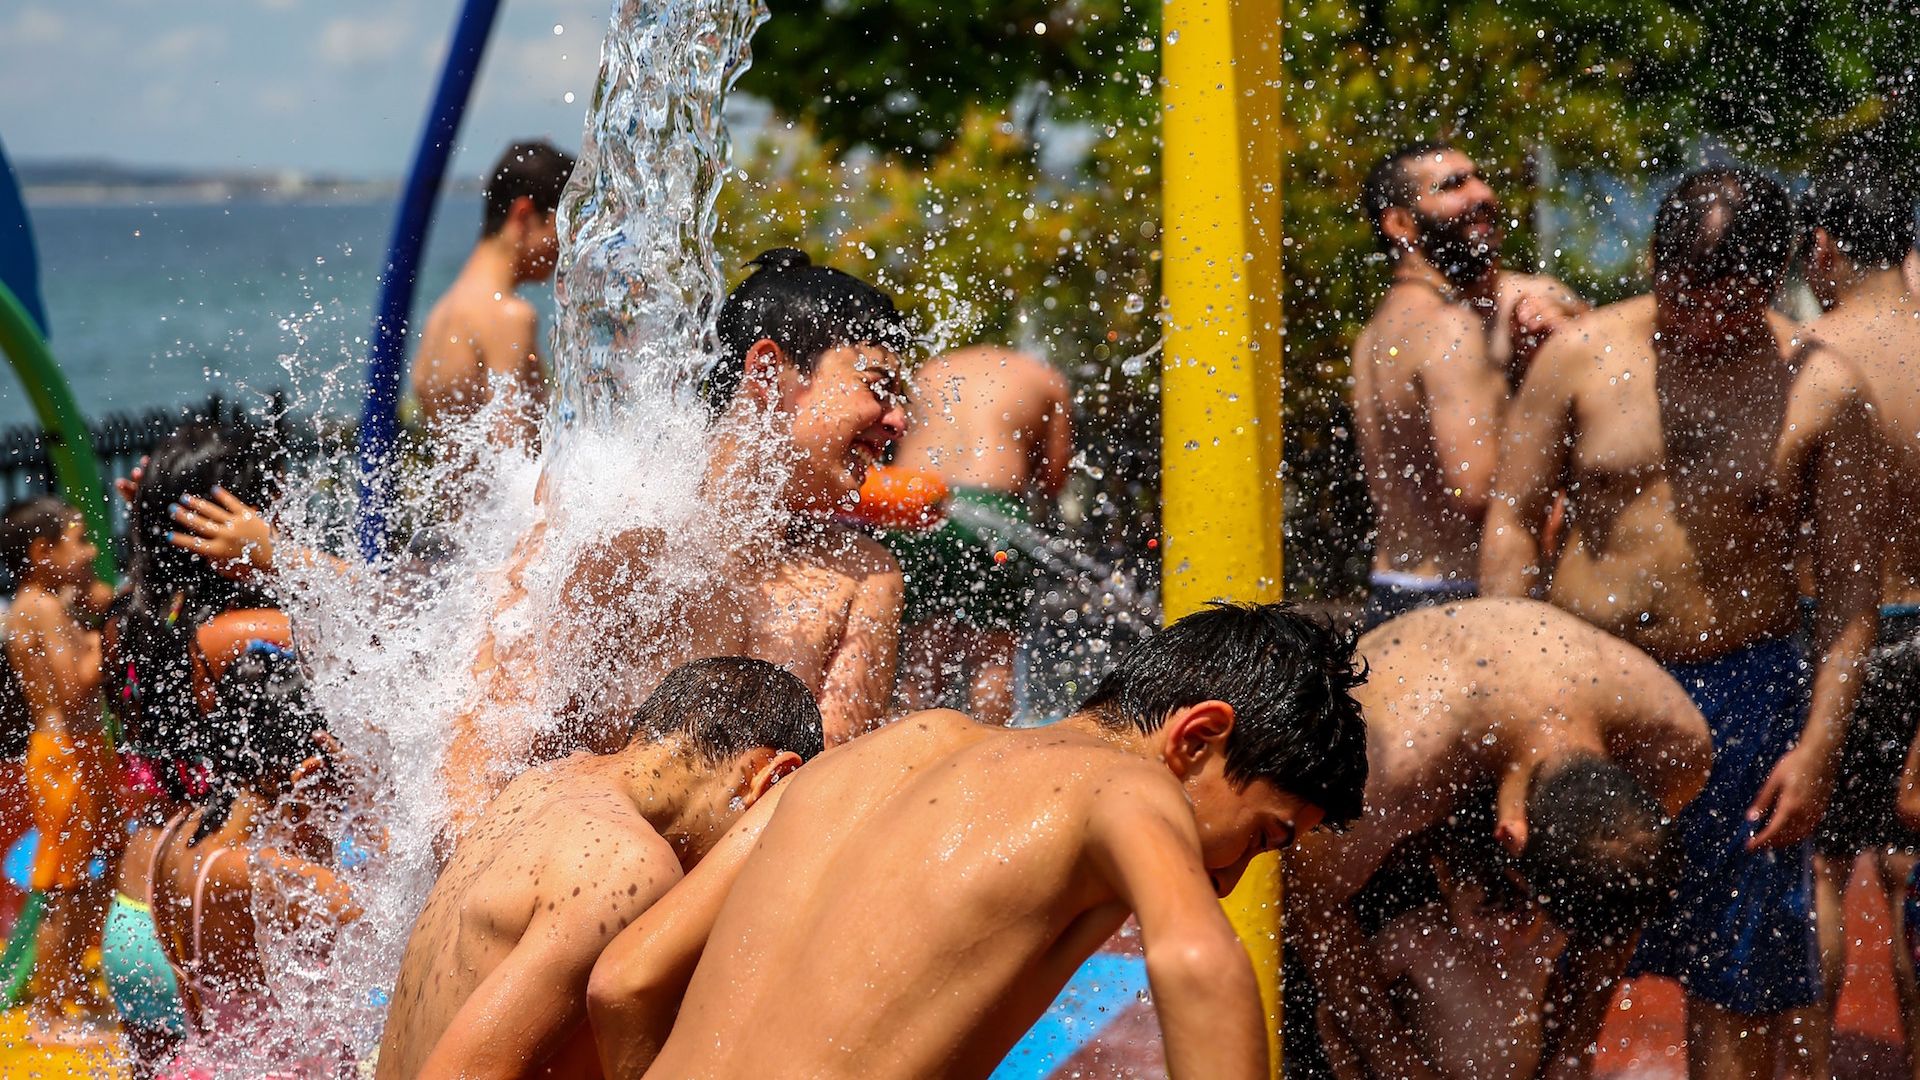 ISTANBUL, TUKEY - JULY 8: People enjoy the water in an attempt to cool of as the heatwave continues at Gurpinar Public Beach, in Istanbul, Turkey on July 8, 2018.